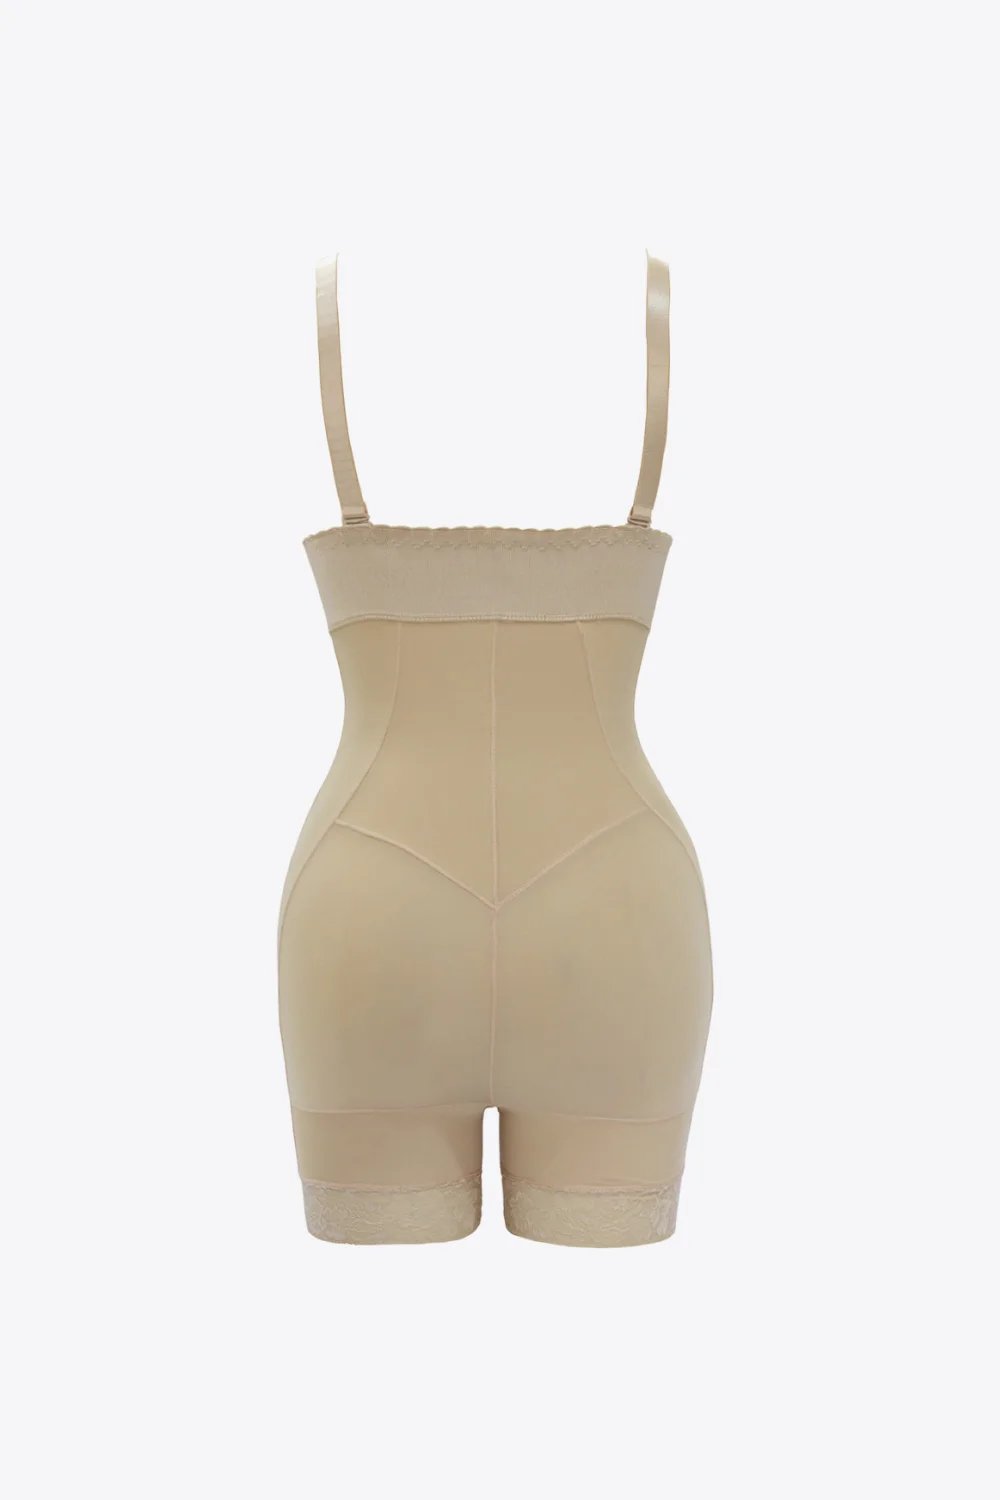 Shop online or pick up in store. We have shapewear for all shapes and  sizes.🍑🔥 Discreet Queen Faja available up to size 8xl, removable straps  and easy, By Queen Resilient